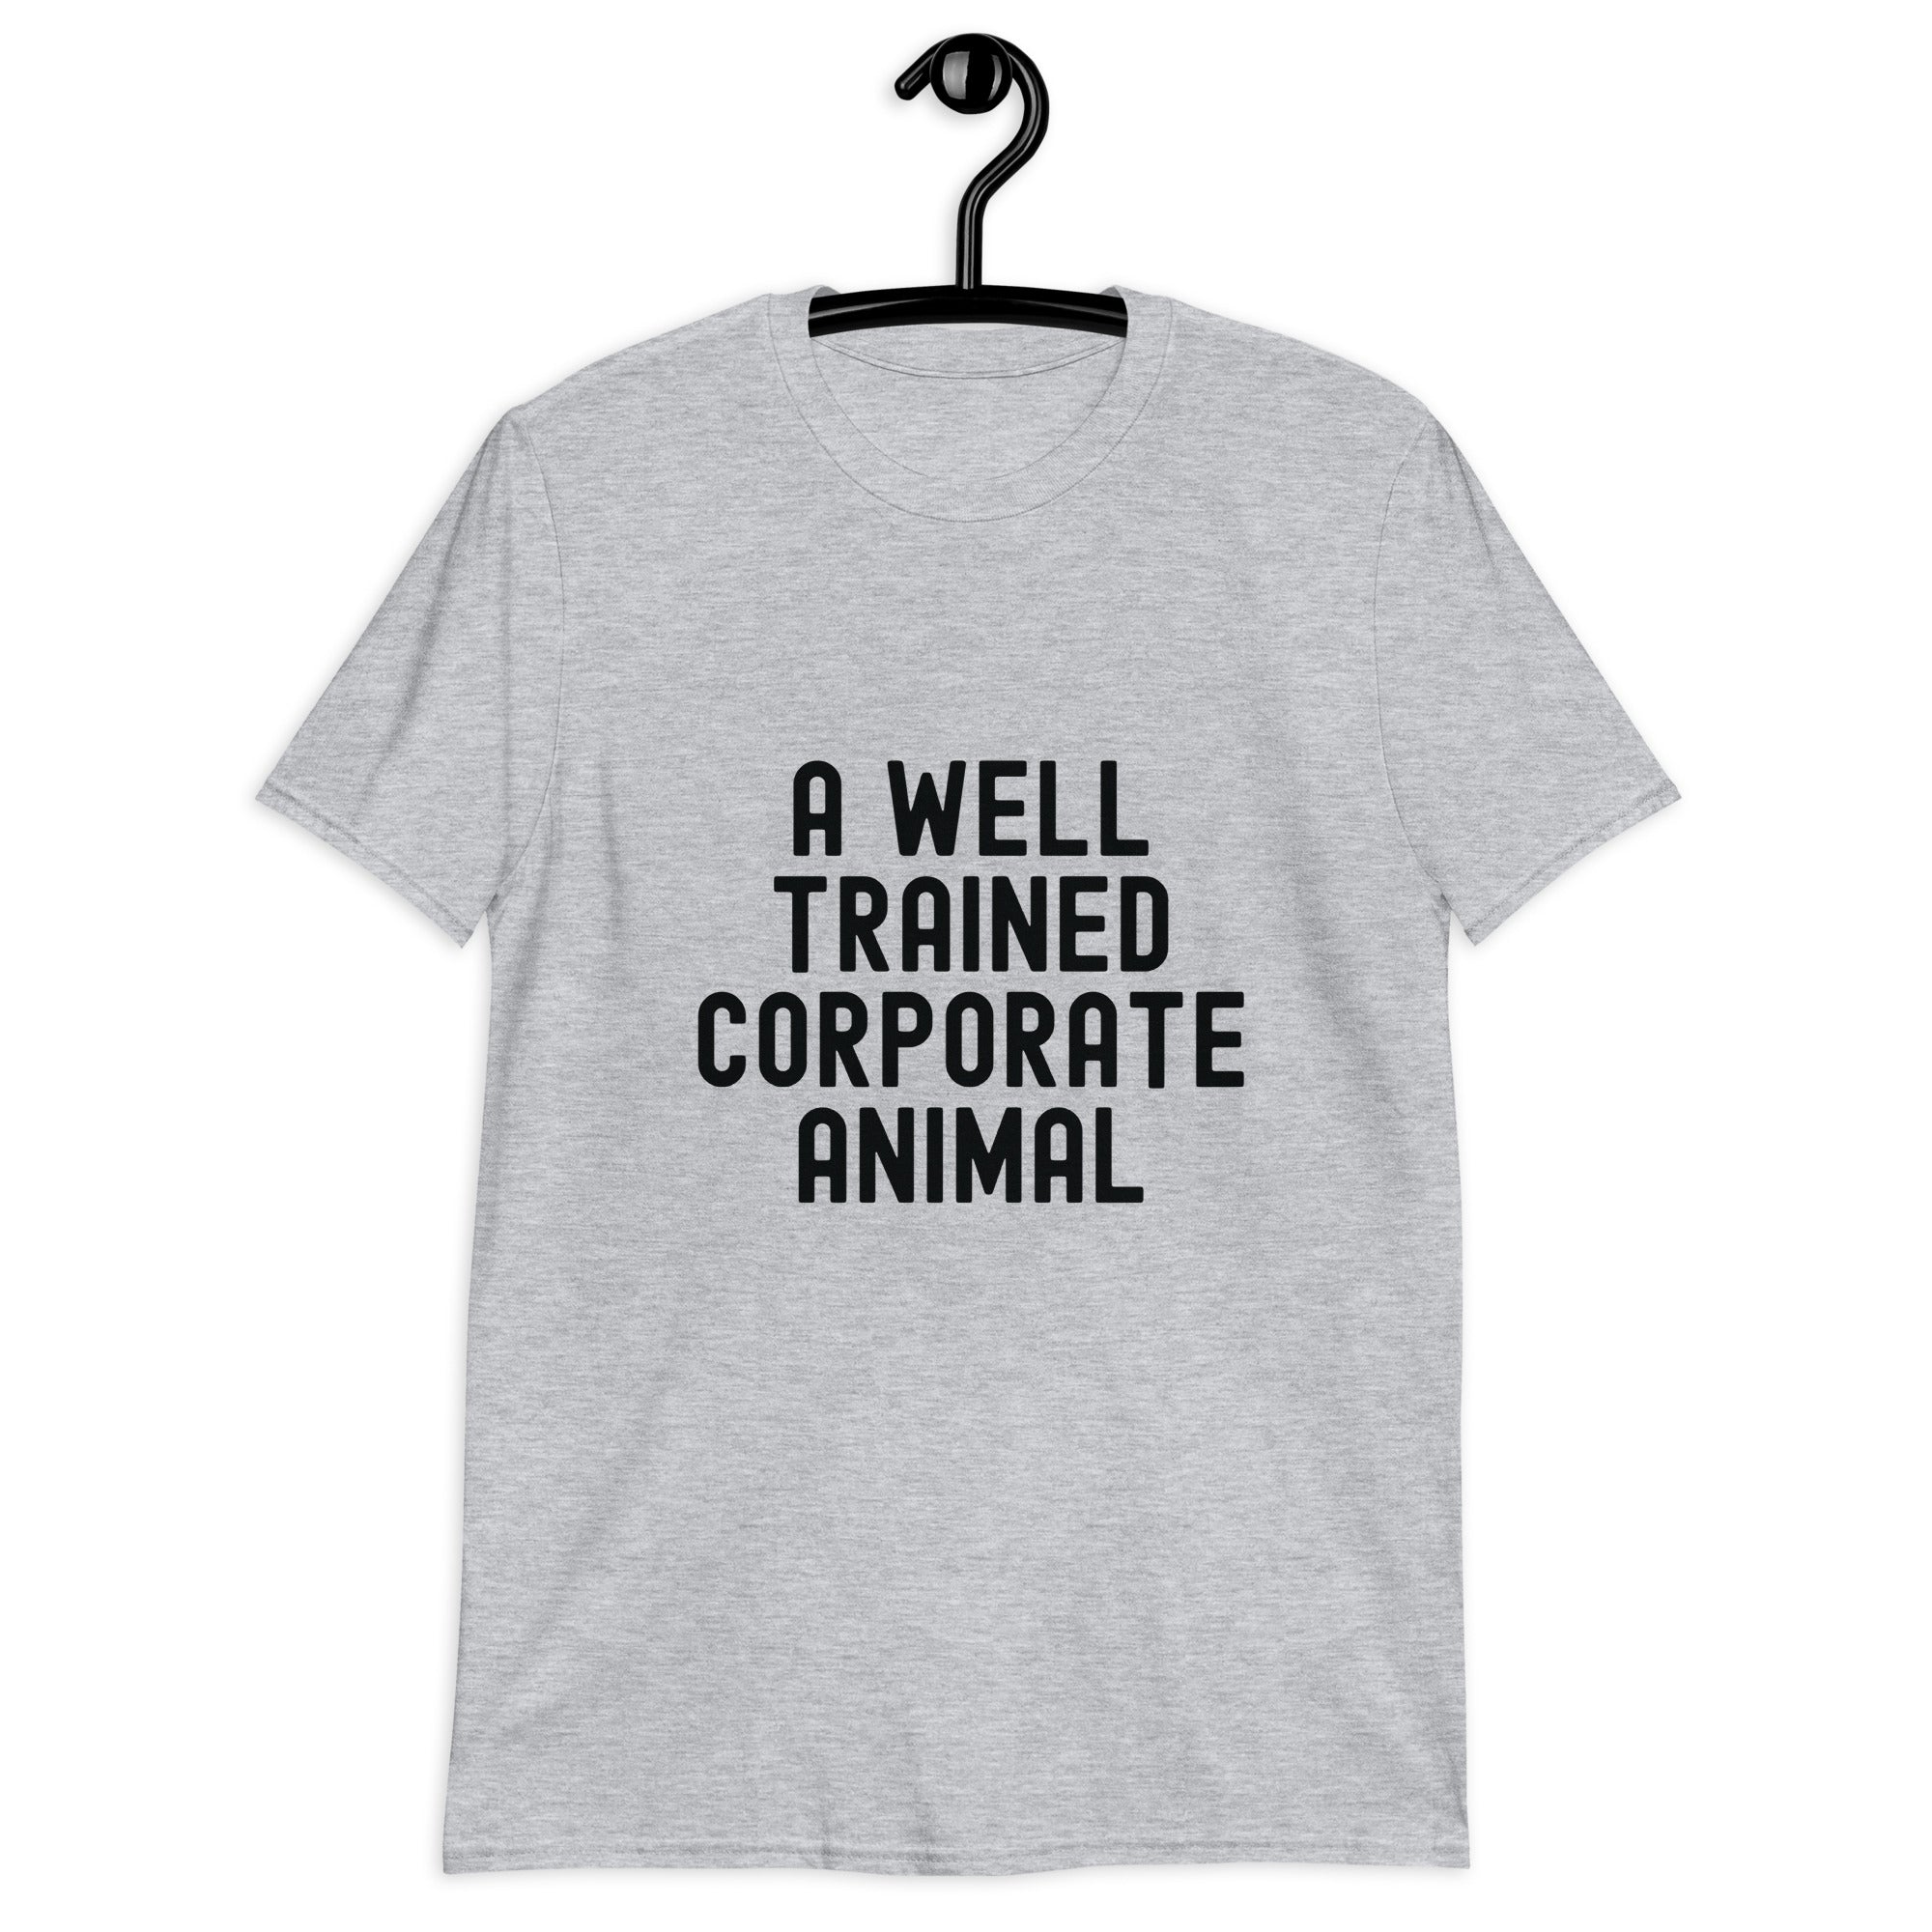 Short-Sleeve Unisex T-Shirt | A well trained corporate animal